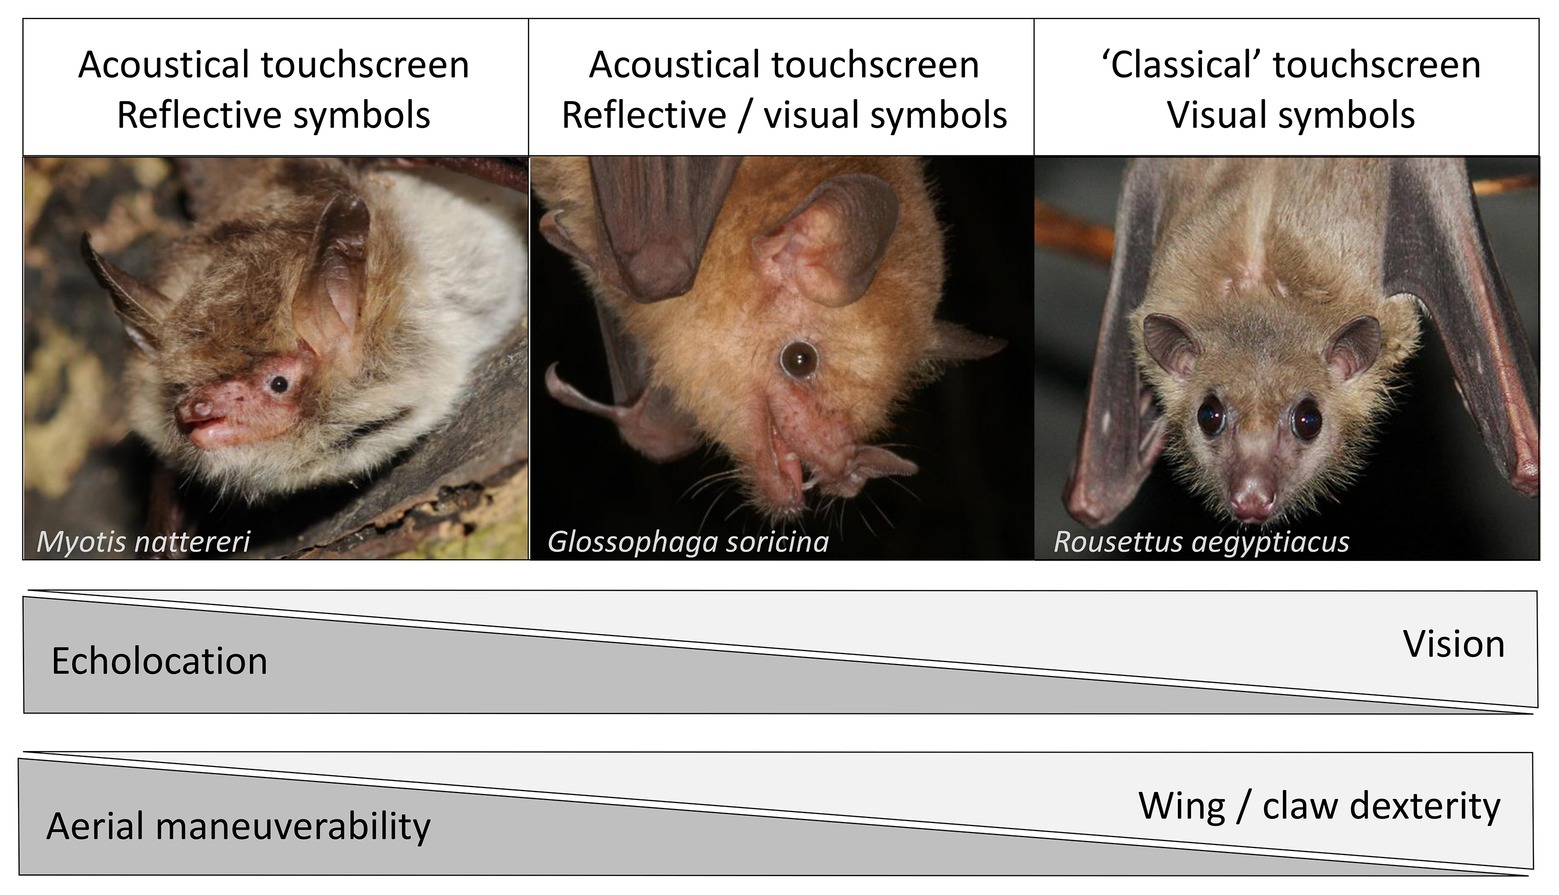 Bat Exclusion Process - Step-By-Step